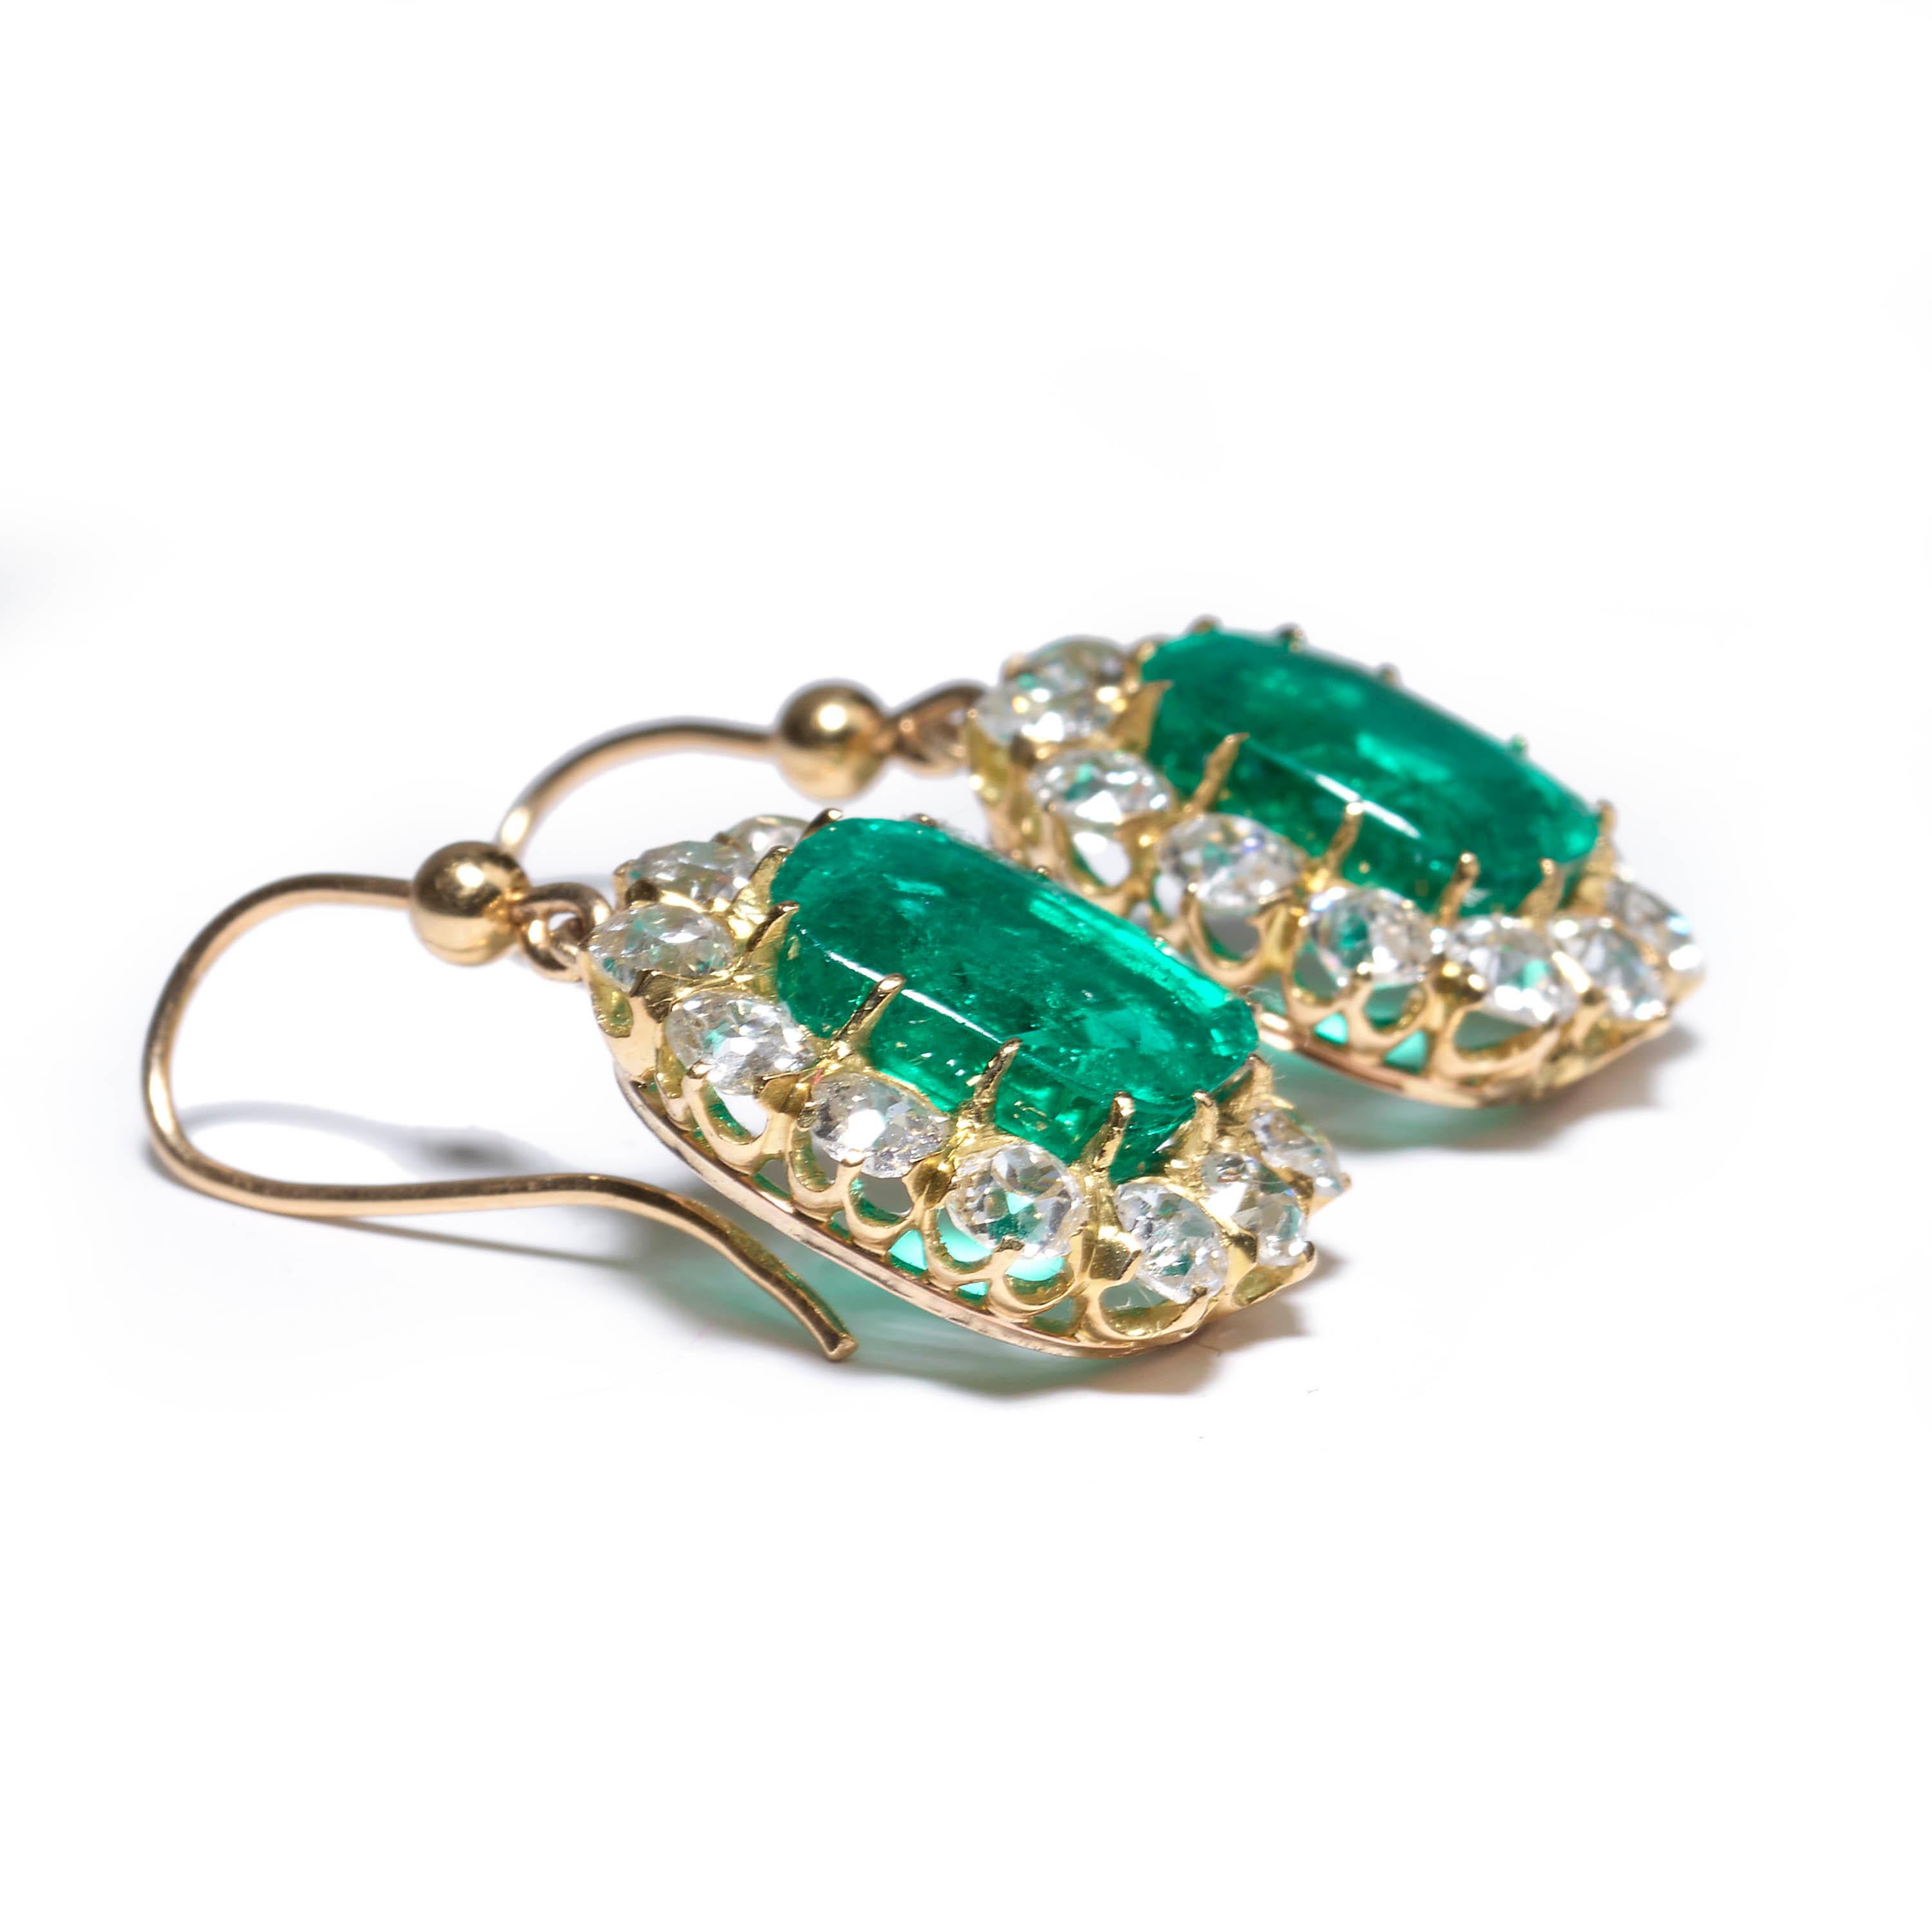 A pair of Victorian drop earrings, comprised of emerald and diamond clusters, centrally set with cushion-shaped emeralds of Colombian origin, weighing 4.94ct and 5.14ct each, surrounded by twelve old-cut diamonds, weighing an estimated total of